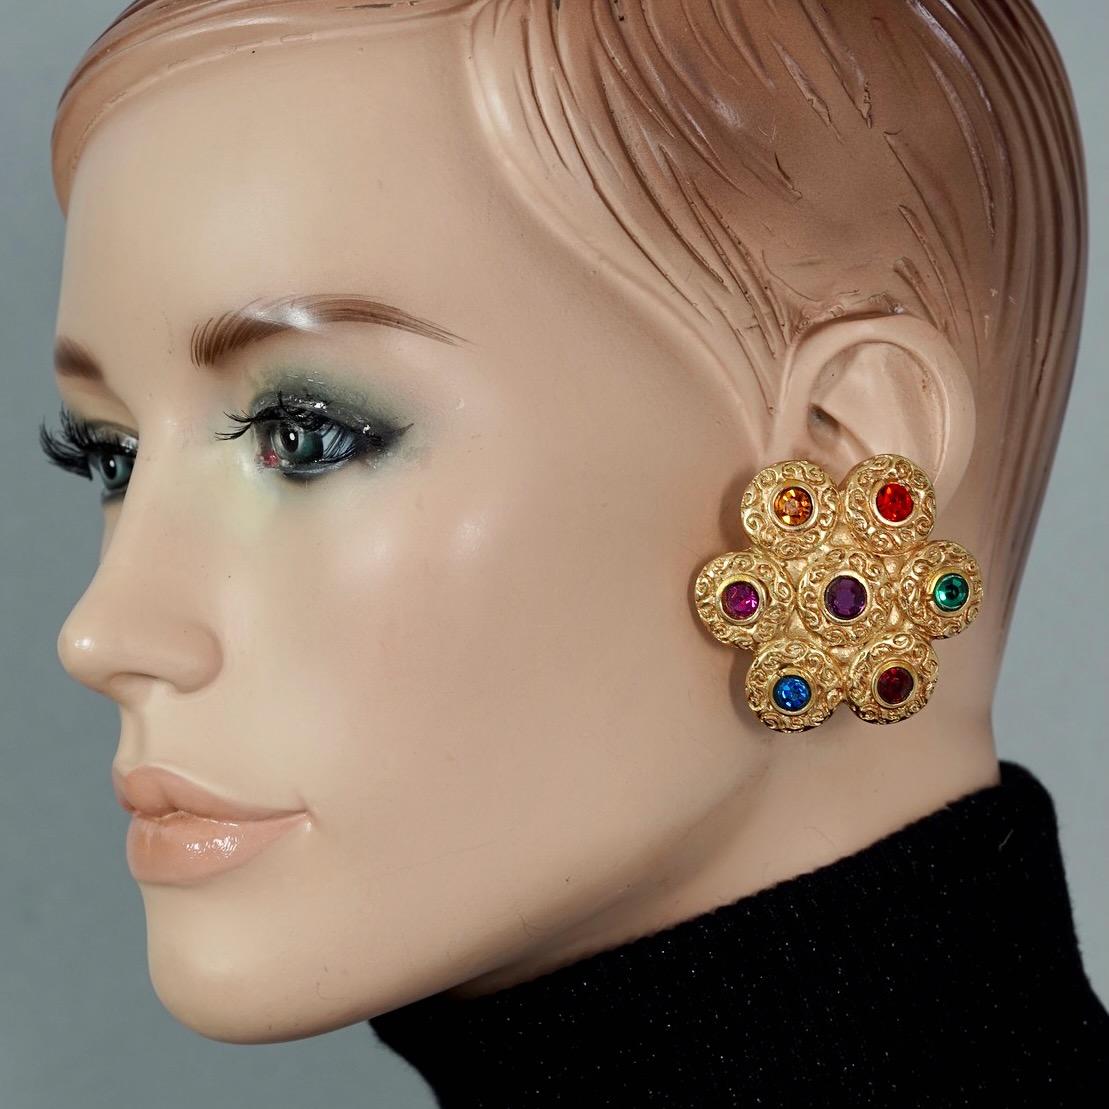 Vintage Massive JACKY DE G Baroque Jewel Flower Earrings

Measurements:
Height: 1.85 inches (4.7 cm)
Width: 1.85 inches (4.7 cm)
Weight per Earring: 16 grams

Features:
- 100% Authentic JACKY DE G.
- Baroque flower textured earrings with colourful